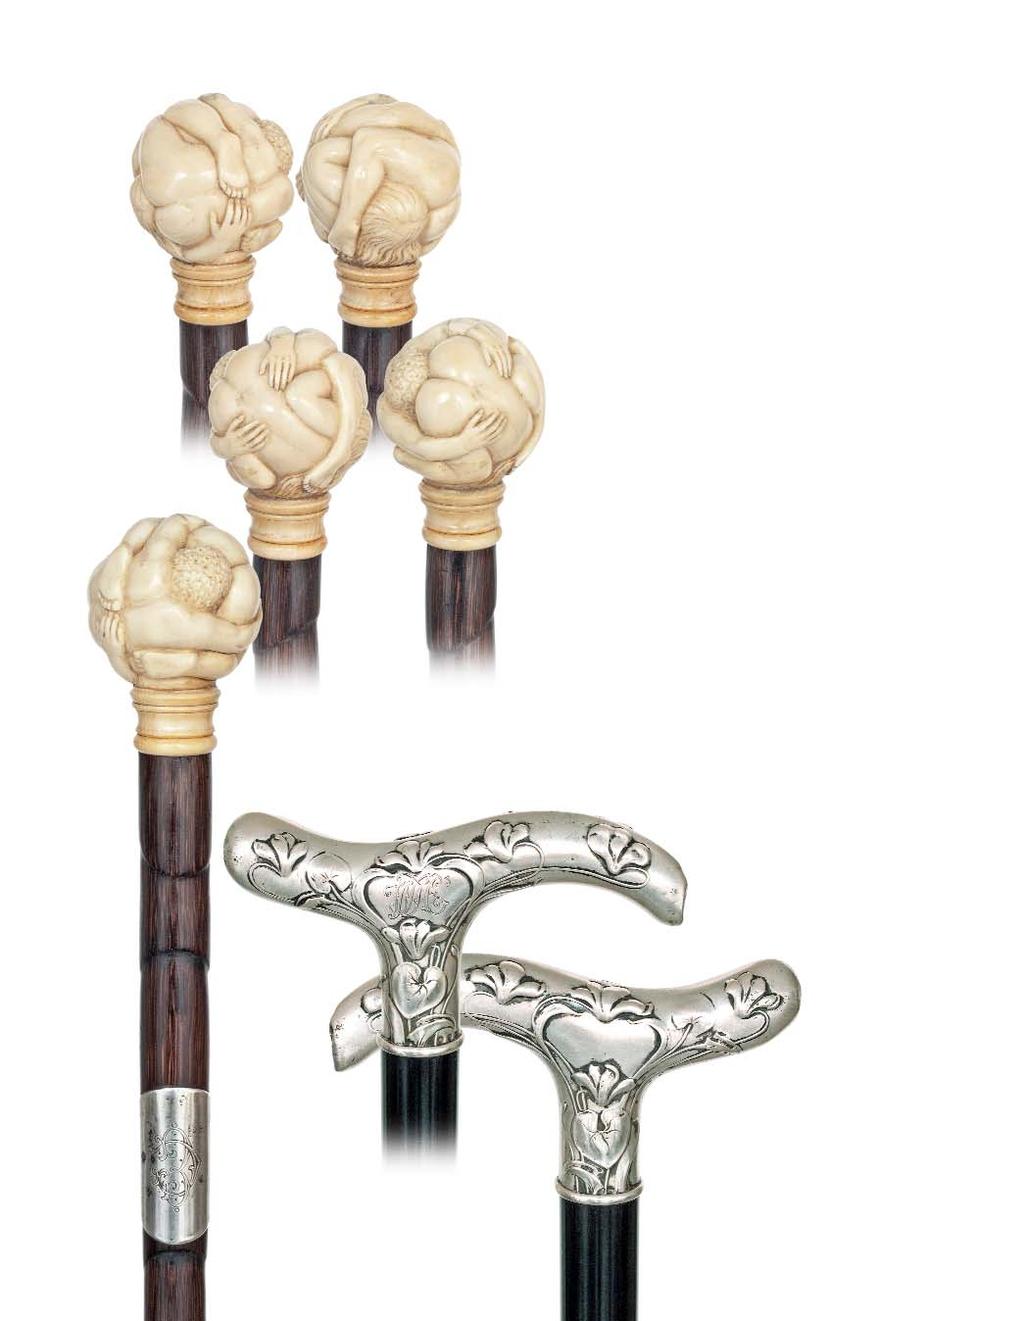 69. Ivory Erotic Cane French, late 19th Century-Ivory ball carved with a naked couple twined together in an erotic embrace on a stepped partrige shaft with personalized, wrapping silver collar and